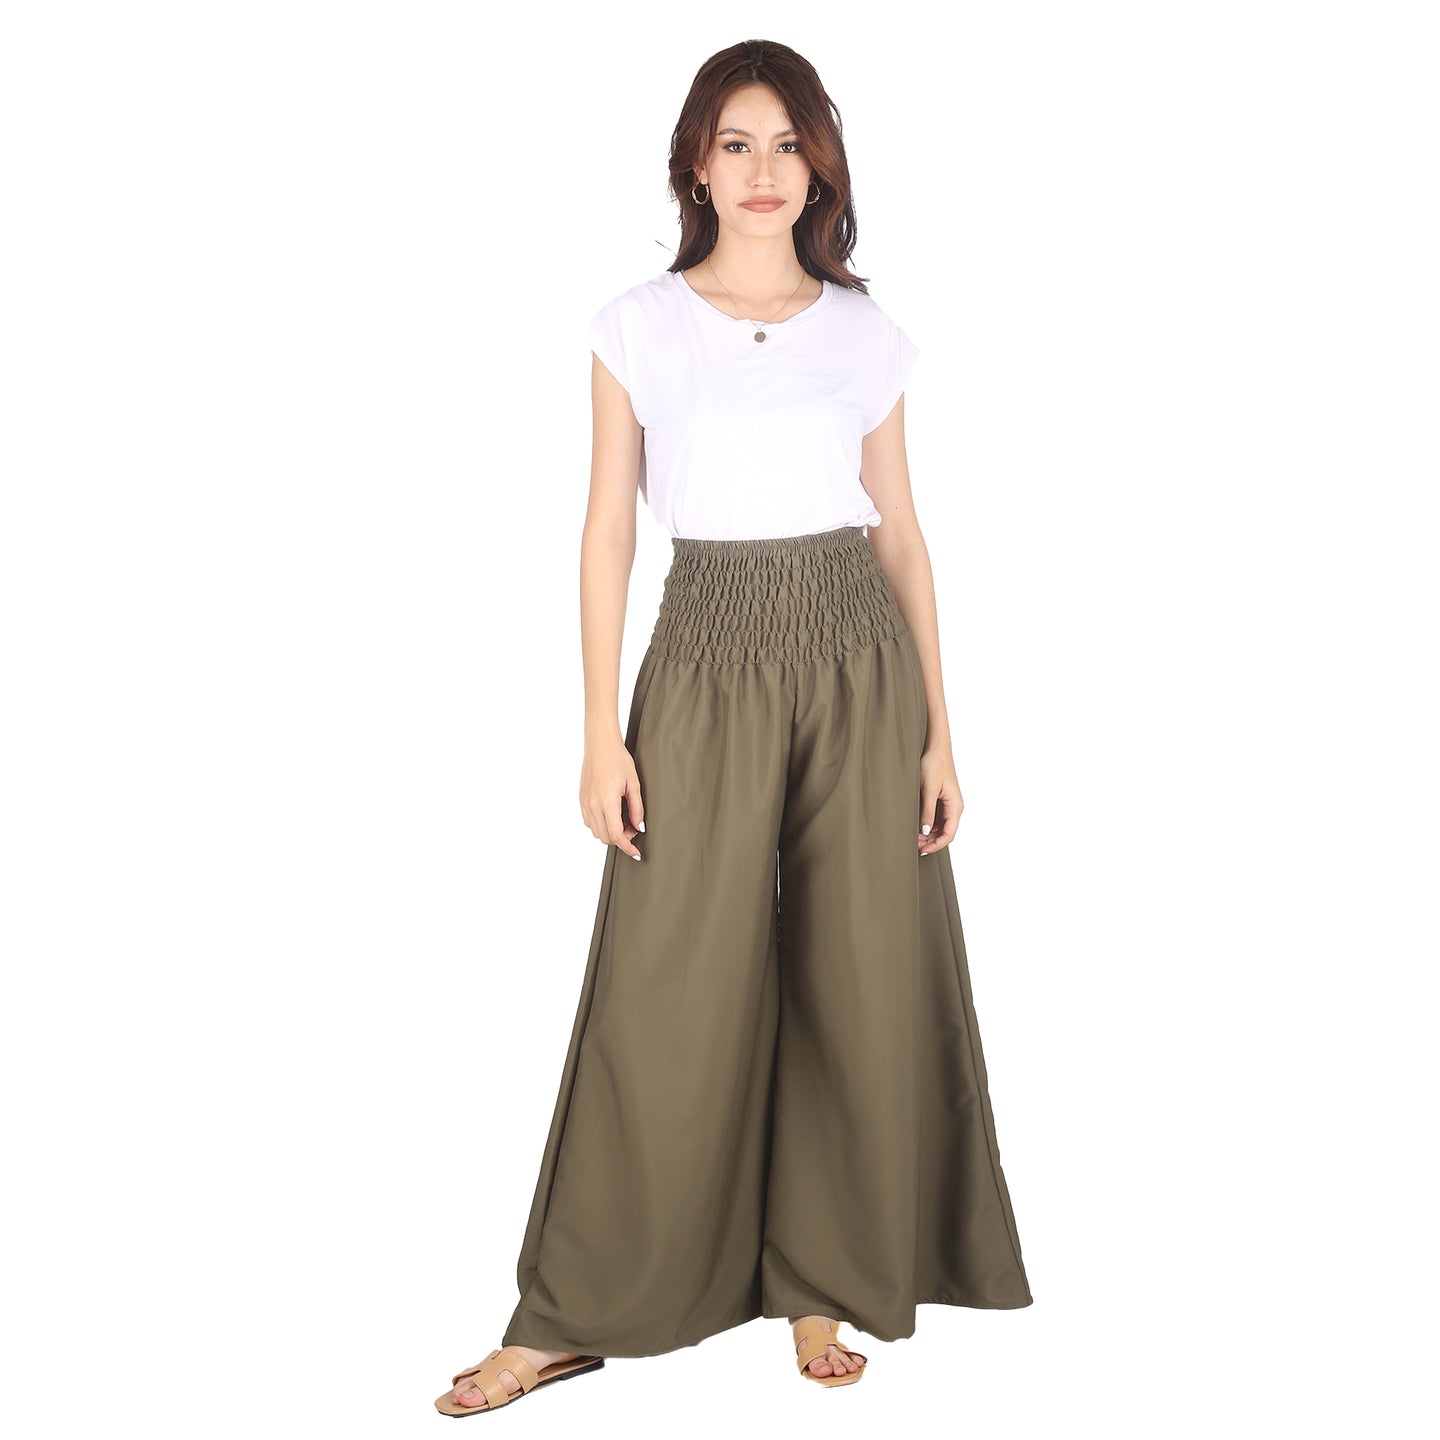 Solid Color Women's Wide Leg Pants in Olive PP0311 130000 21